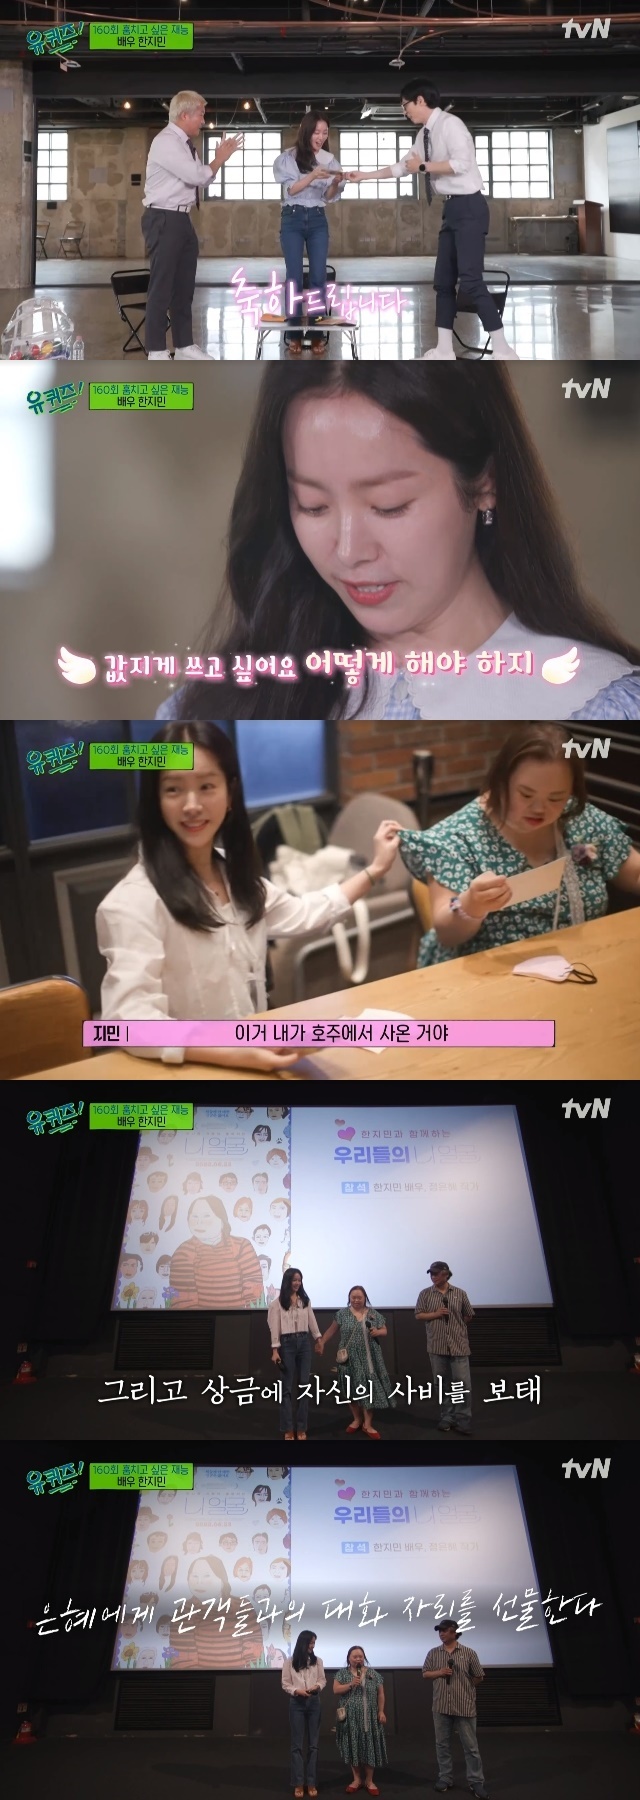 The use of the valuable prize money by Han Ji-min was impressive.In the 160th episode of tvN You Quiz on the Block (hereinafter referred to as You Quiz on the Block), which was broadcast on July 6, Actor Han Ji-min appeared as a guest for the special feature of The Talent to Stolen.On this day, Han Ji-min talked about the drama Our Blues and Down Syndrome Actor Jung Eun-hye, who appeared as twins with him, and suddenly confessed, I want to promote something.Han Ji-min mentioned the documentary film Nee Face, which tells the story of Jung Eun-hye, who is also a real caricature writer, who began to draw in 2017, and communicates with the world.Han Ji-min said, I saw it a while ago, but it was too healing and I kept laughing. He said, If these movies are more interested and loved, I would like to have the courage to come out to society.Han Ji-min, who received a prize money of 1 million won for the quiz, said, I want to write it for a price.